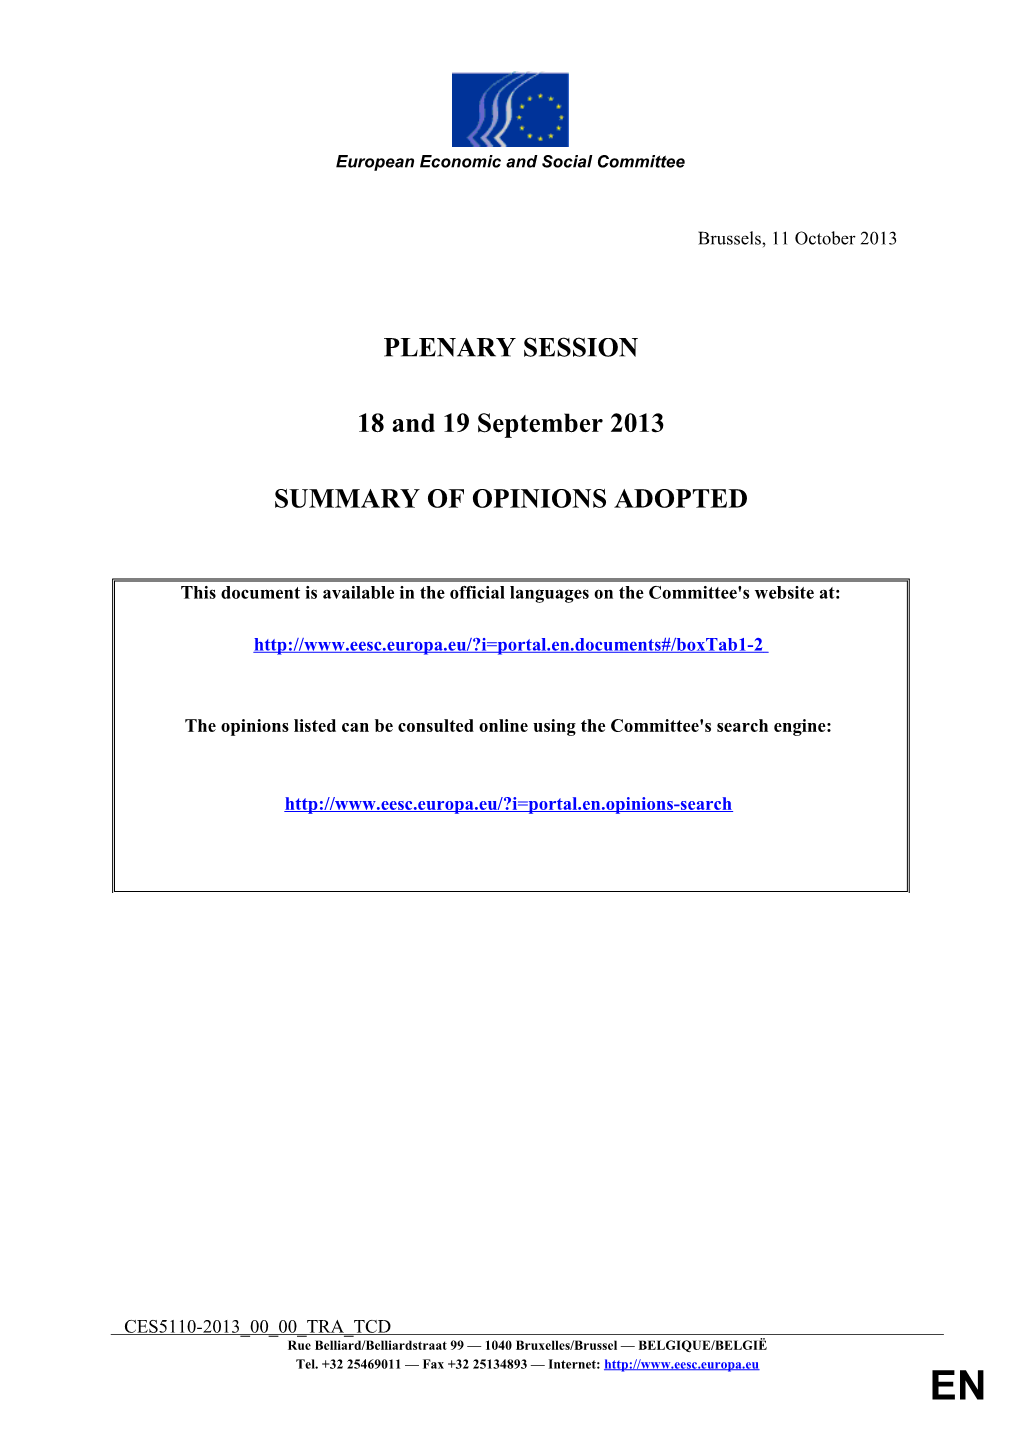 SUMMARY of OPINIONS ADOPTED - Session of 18 & 19 September 2013